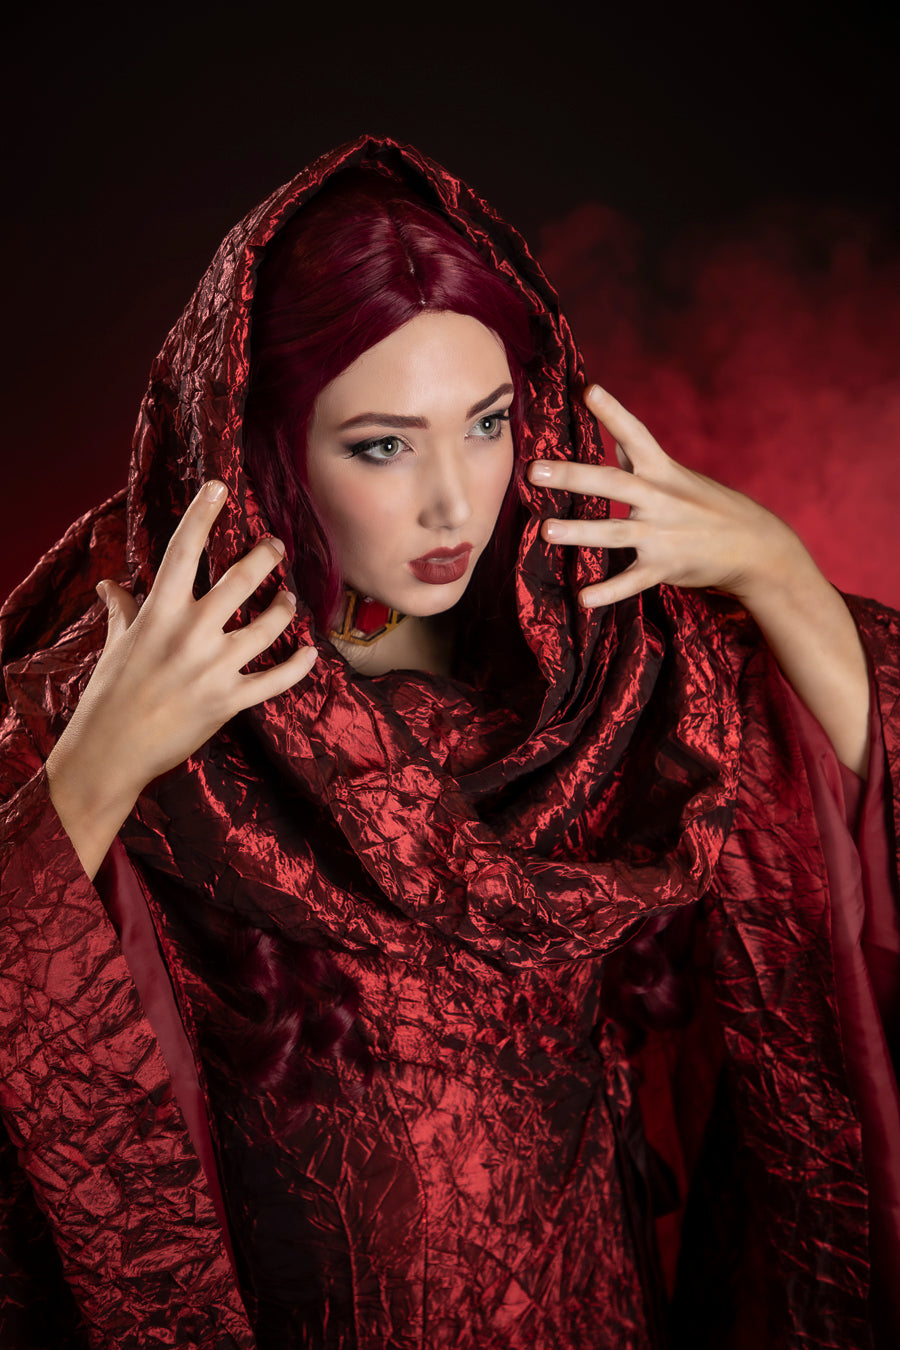 Game of Thrones Melisandre The Red Woman Costume Hire or Cosplay, plus Makeup and Photography. Proudly by and available at, Little Shop of Horrors Costumery Mornington & Melbourne